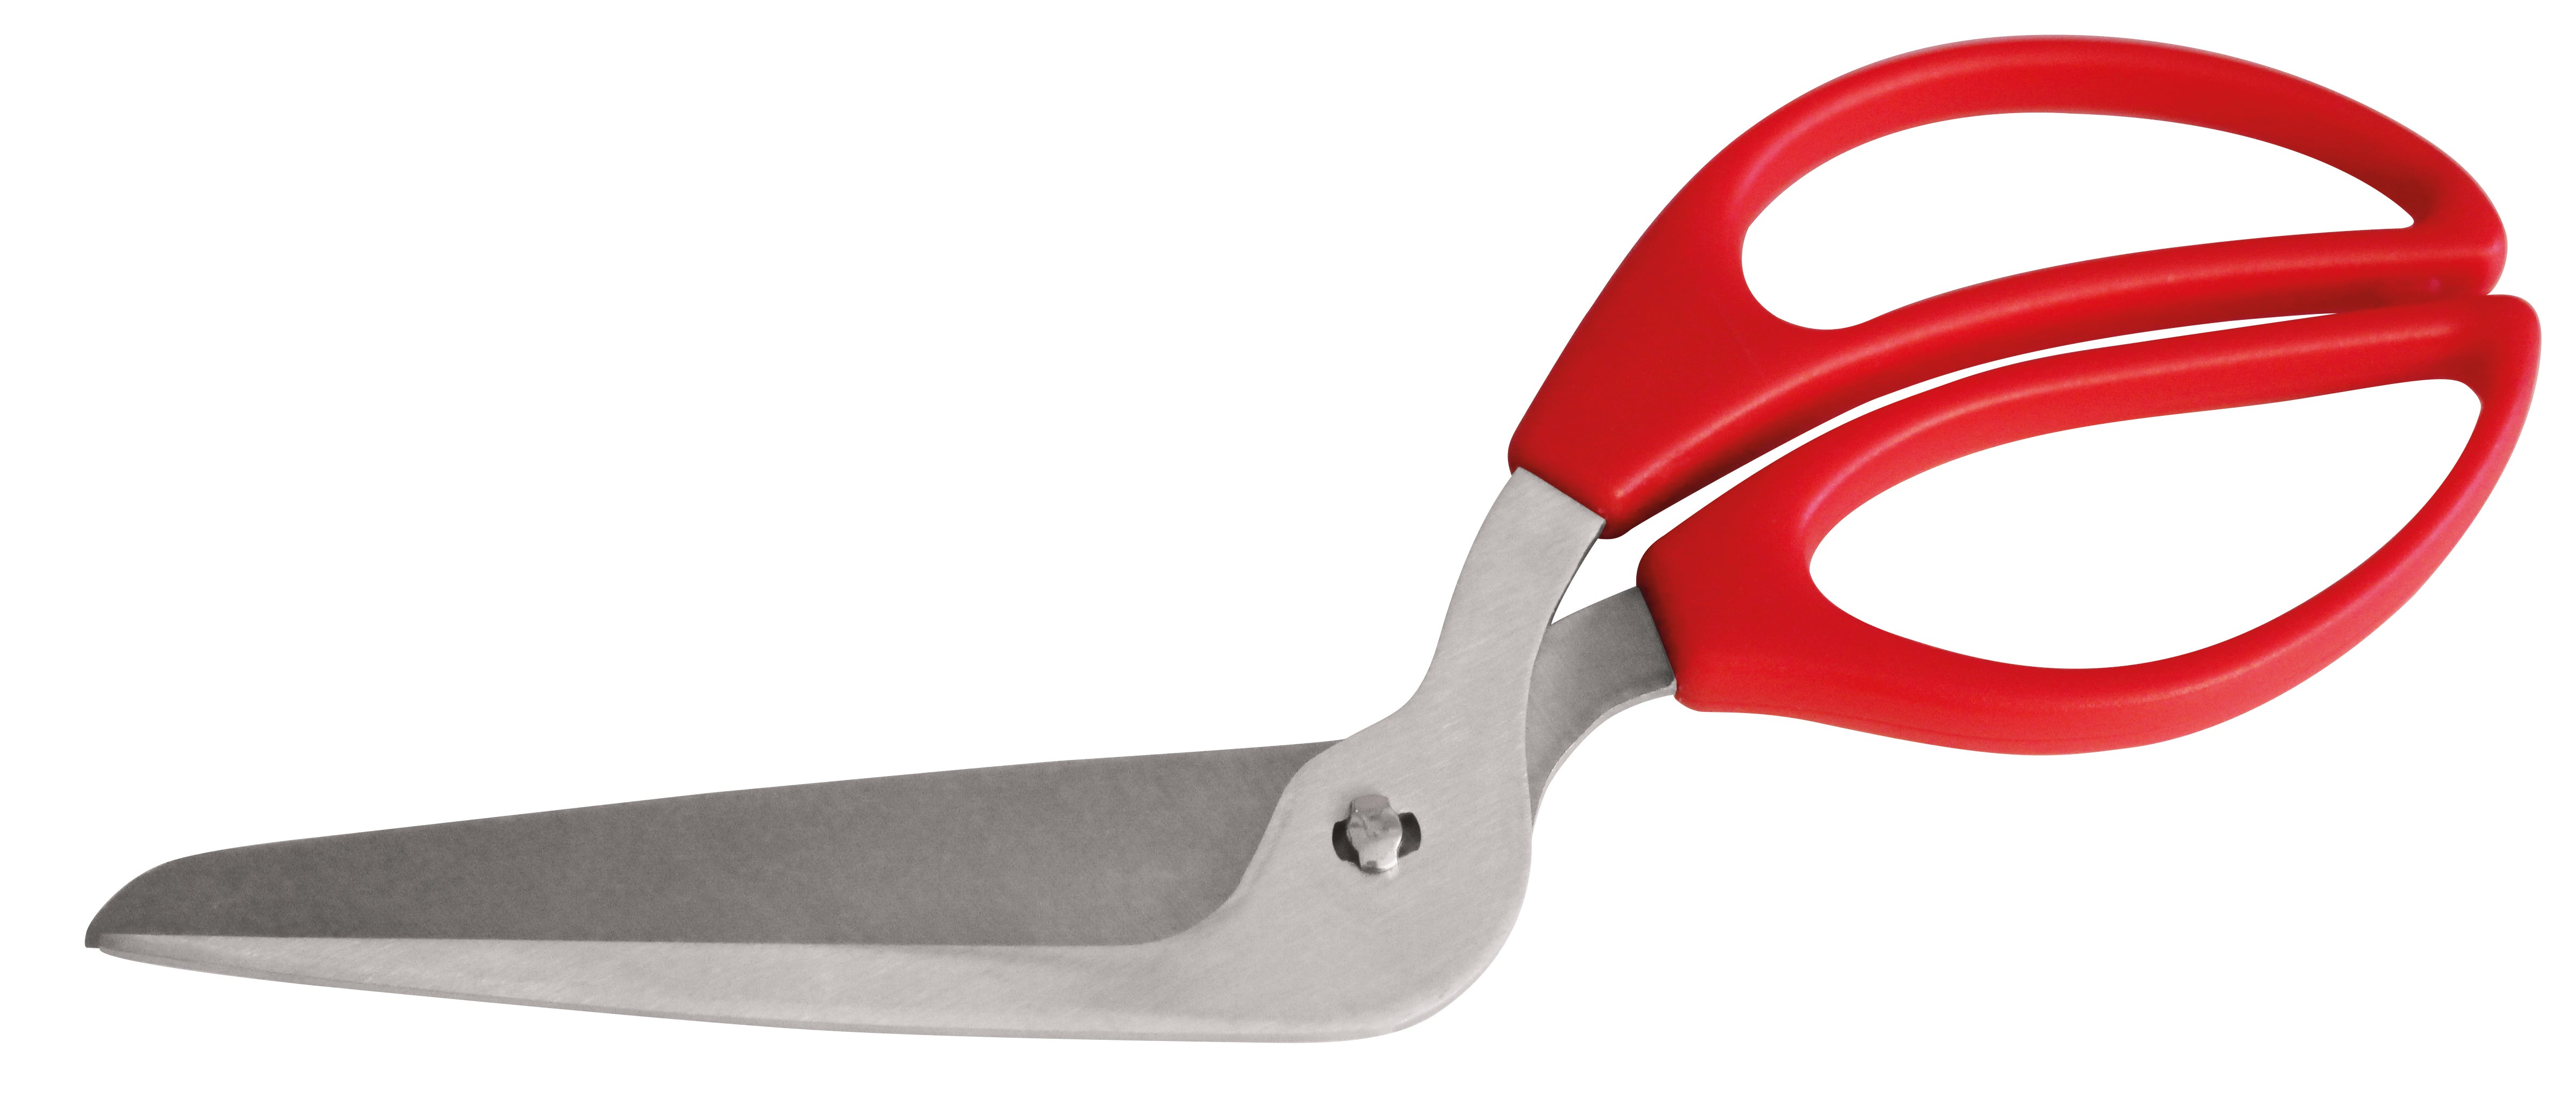 2775 - Pizza Scissors, stainless steel, 5" cutting surface, Red plastic handle, Made in Italy